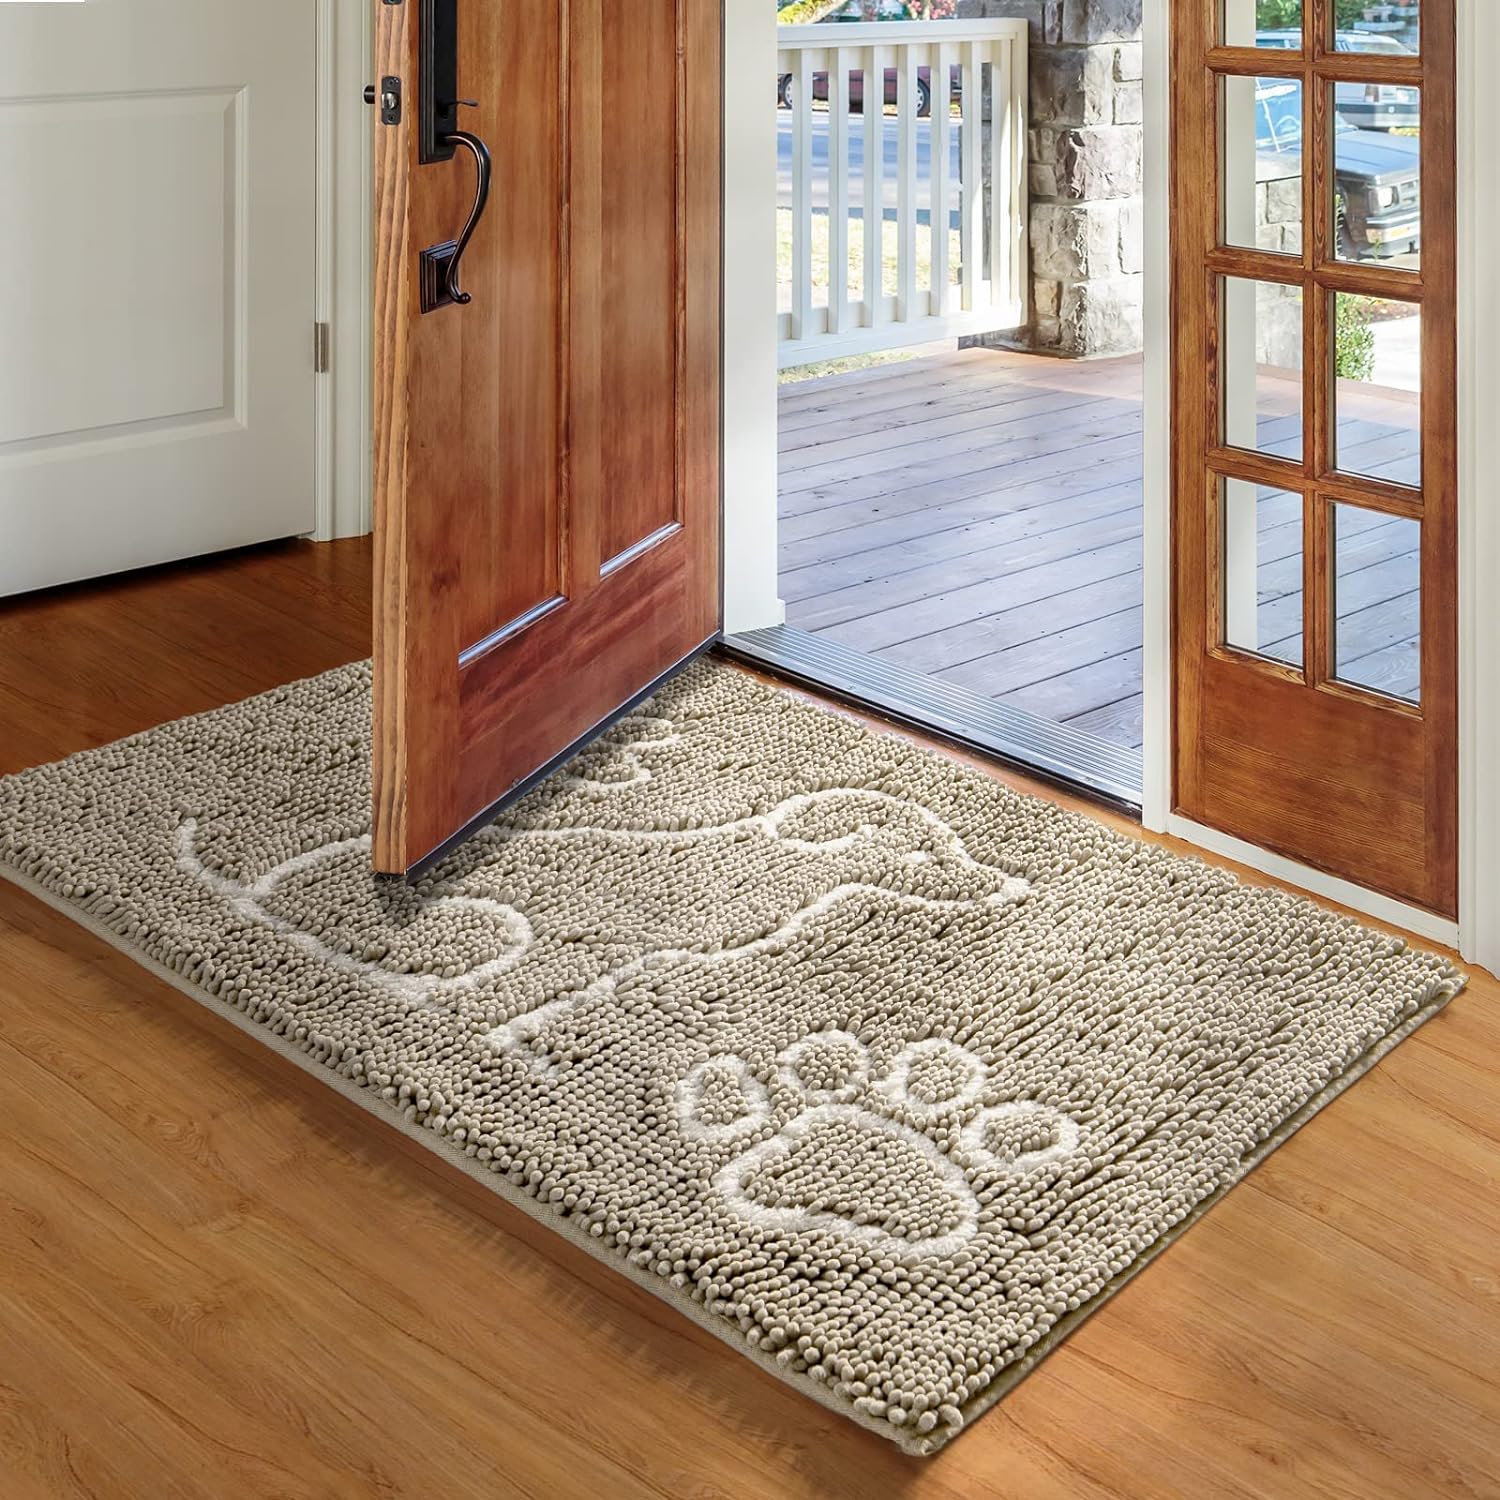 Needed a rug for our back door where dogs come in. Lots of rain last week and the rug kept the floor dry and non muddy. Stays put well and absorbs well. It is thick so not all doors will open over it.